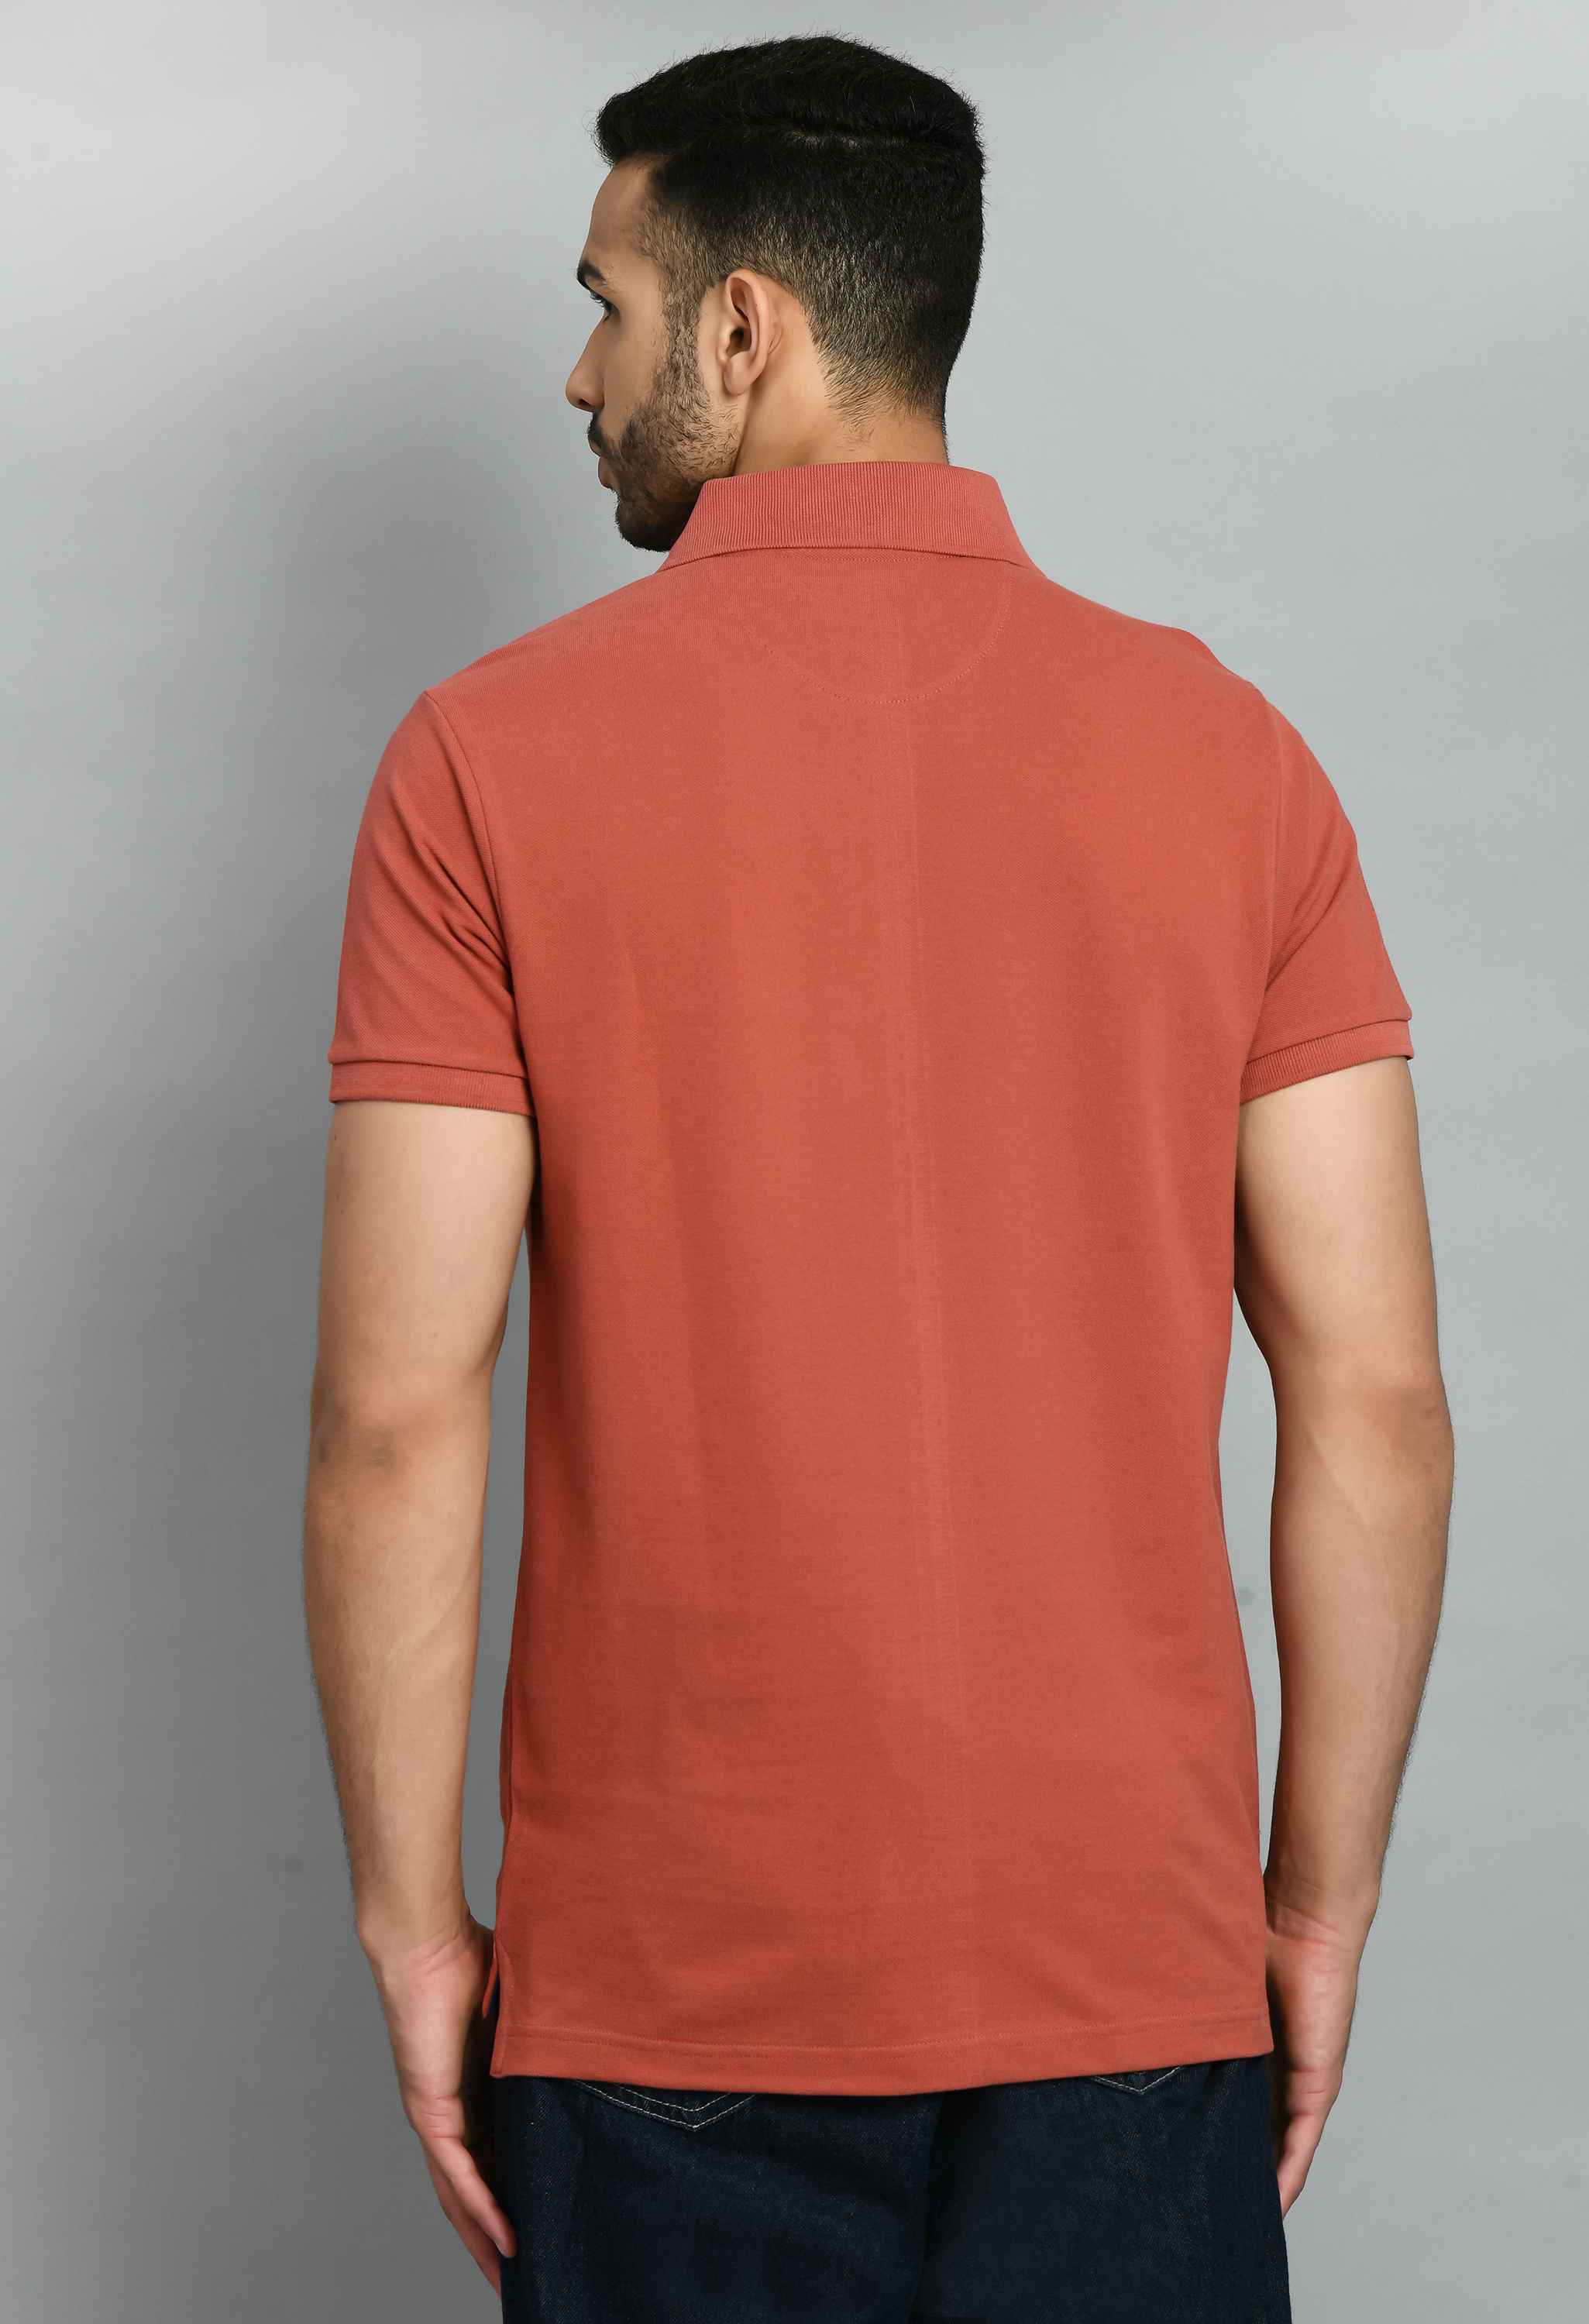 Men's Solid Rust Smart Fit Polo T-Shirt